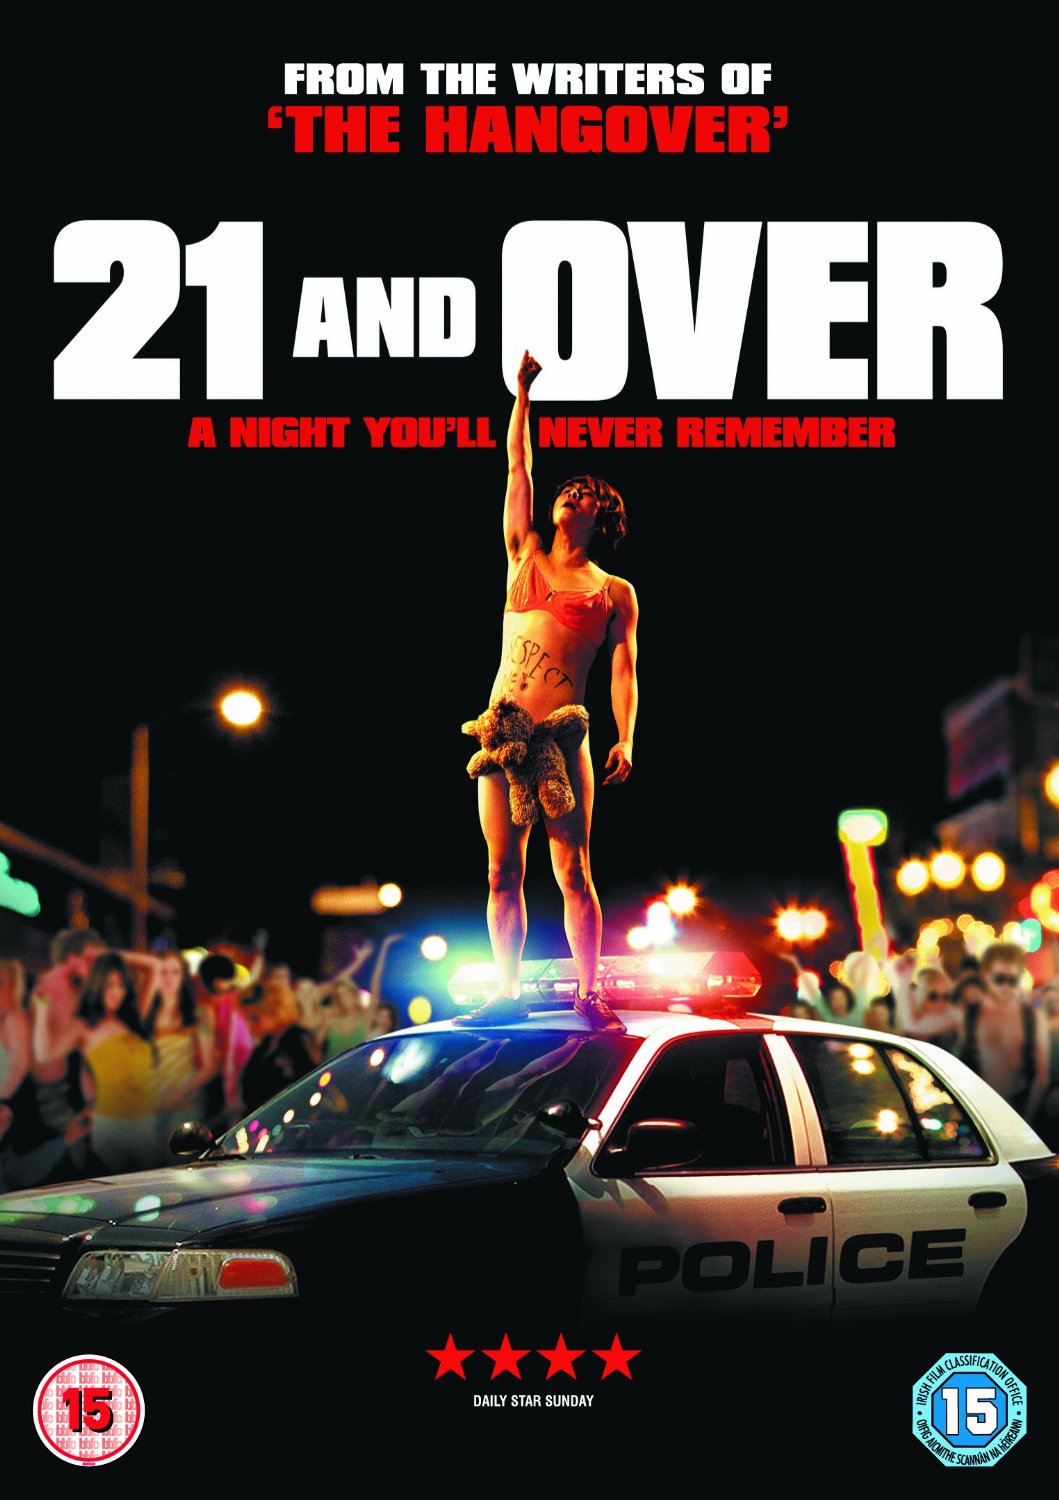 boom competitions - win a copy of 21 And Over on DVD